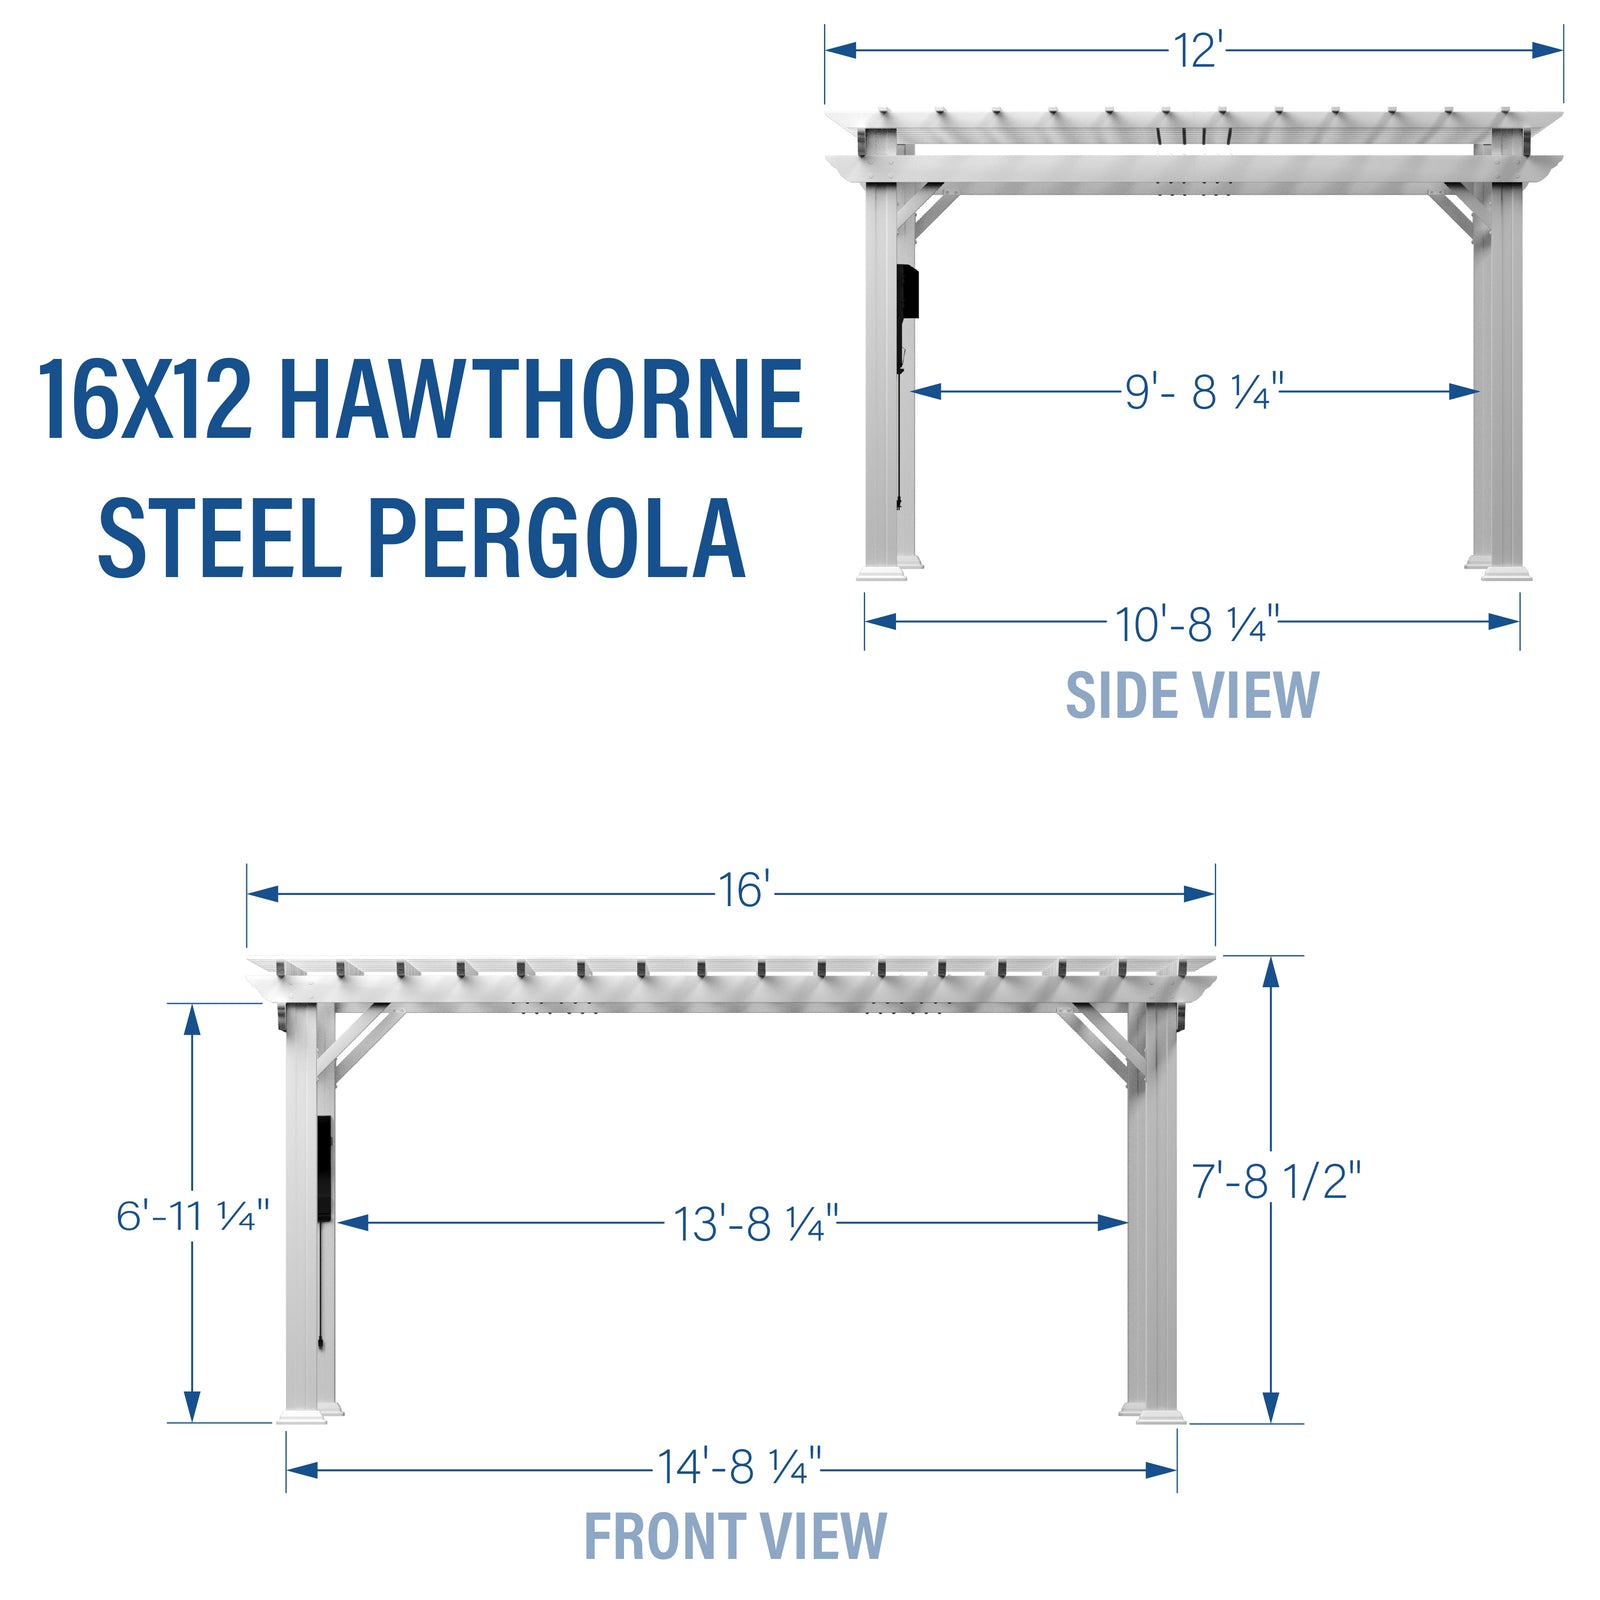 Load image into Gallery viewer, 16x12 Hawthorne Steel Pergola Dimensions
